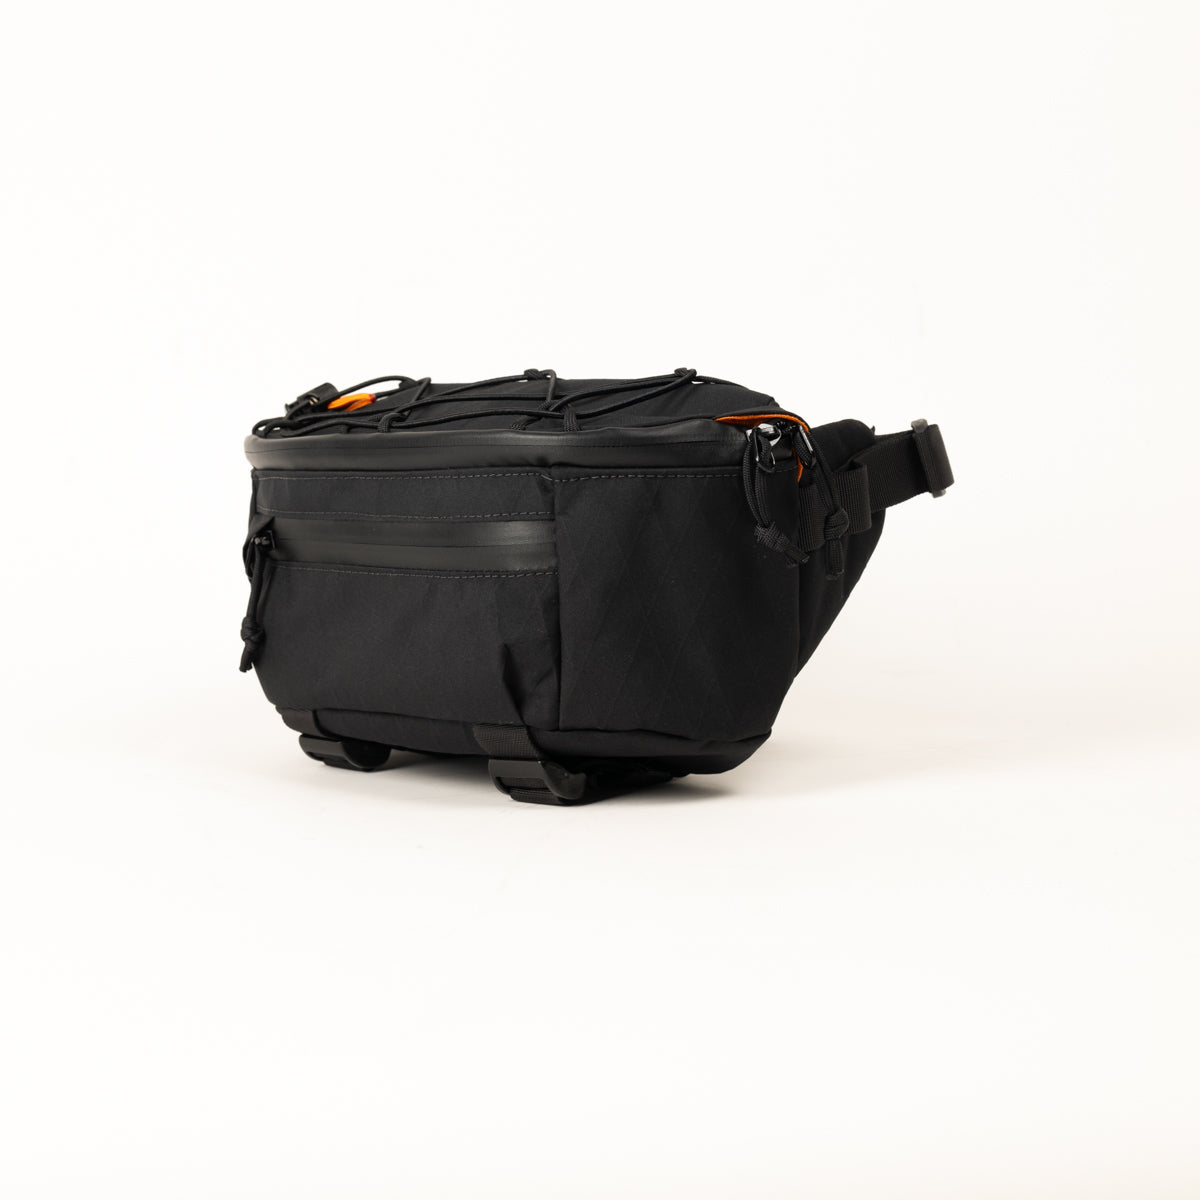 Route Unknown : Sling Pack V3 : Xpac Black